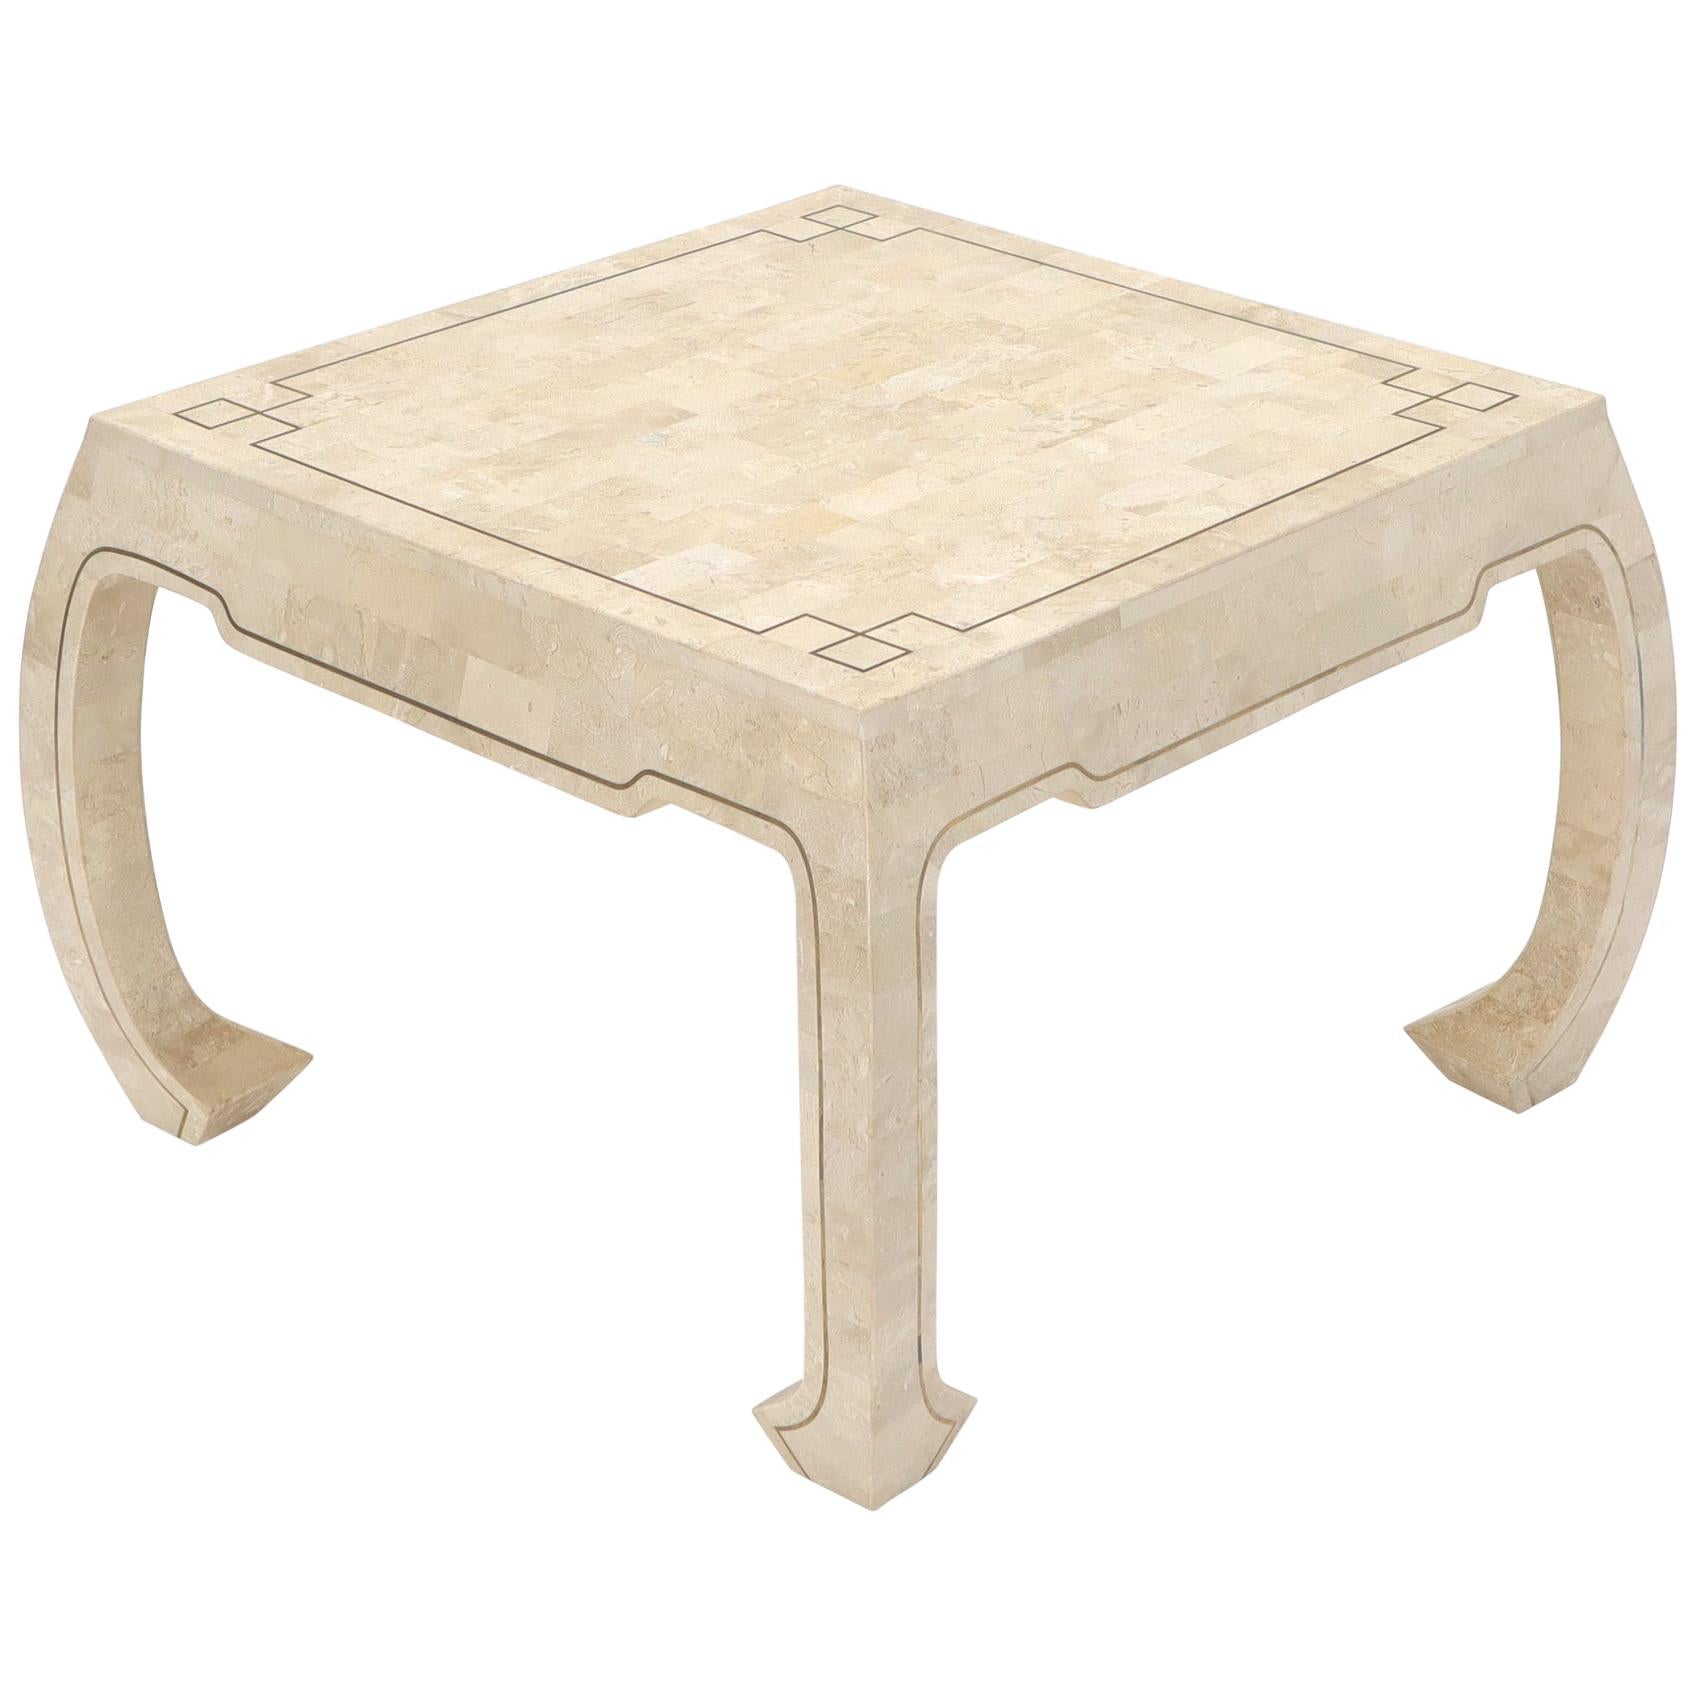 Tessellated Stone Veneer Brass Inlay Square Occasional Coffee Side Table For Sale